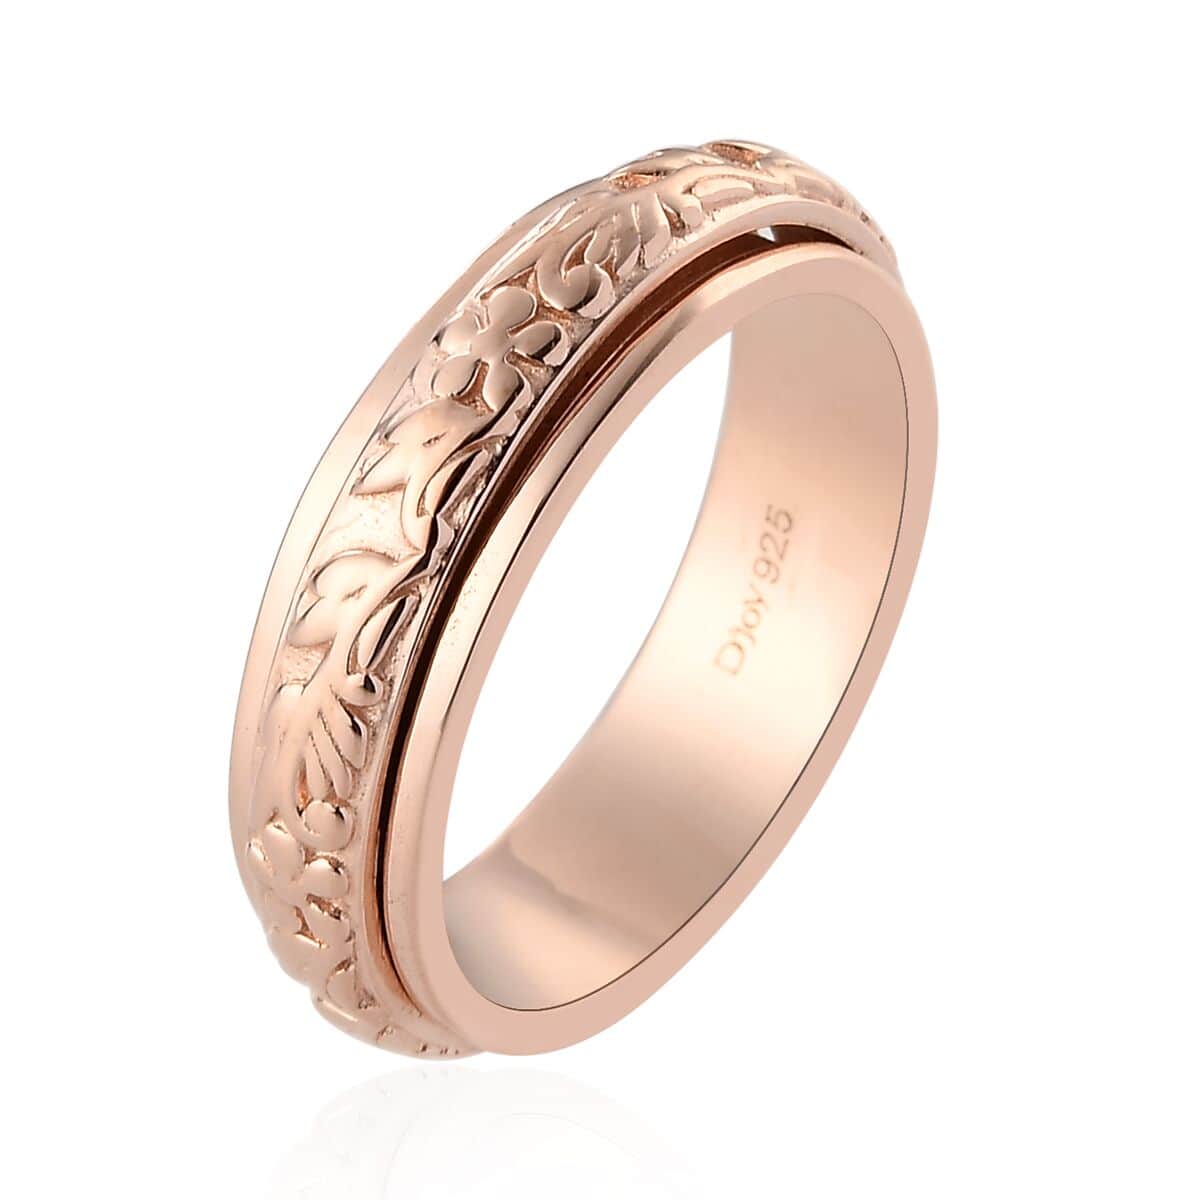 Floral Fidget Spinner Ring for Anxiety in Vermeil Rose Gold Over Sterling Silver, Anxiety Ring for Women, Fidget Rings for Anxiety, Stress Relieving Anxiety Ring, Promise Rings 4.50 Grams (Size 11) image number 3